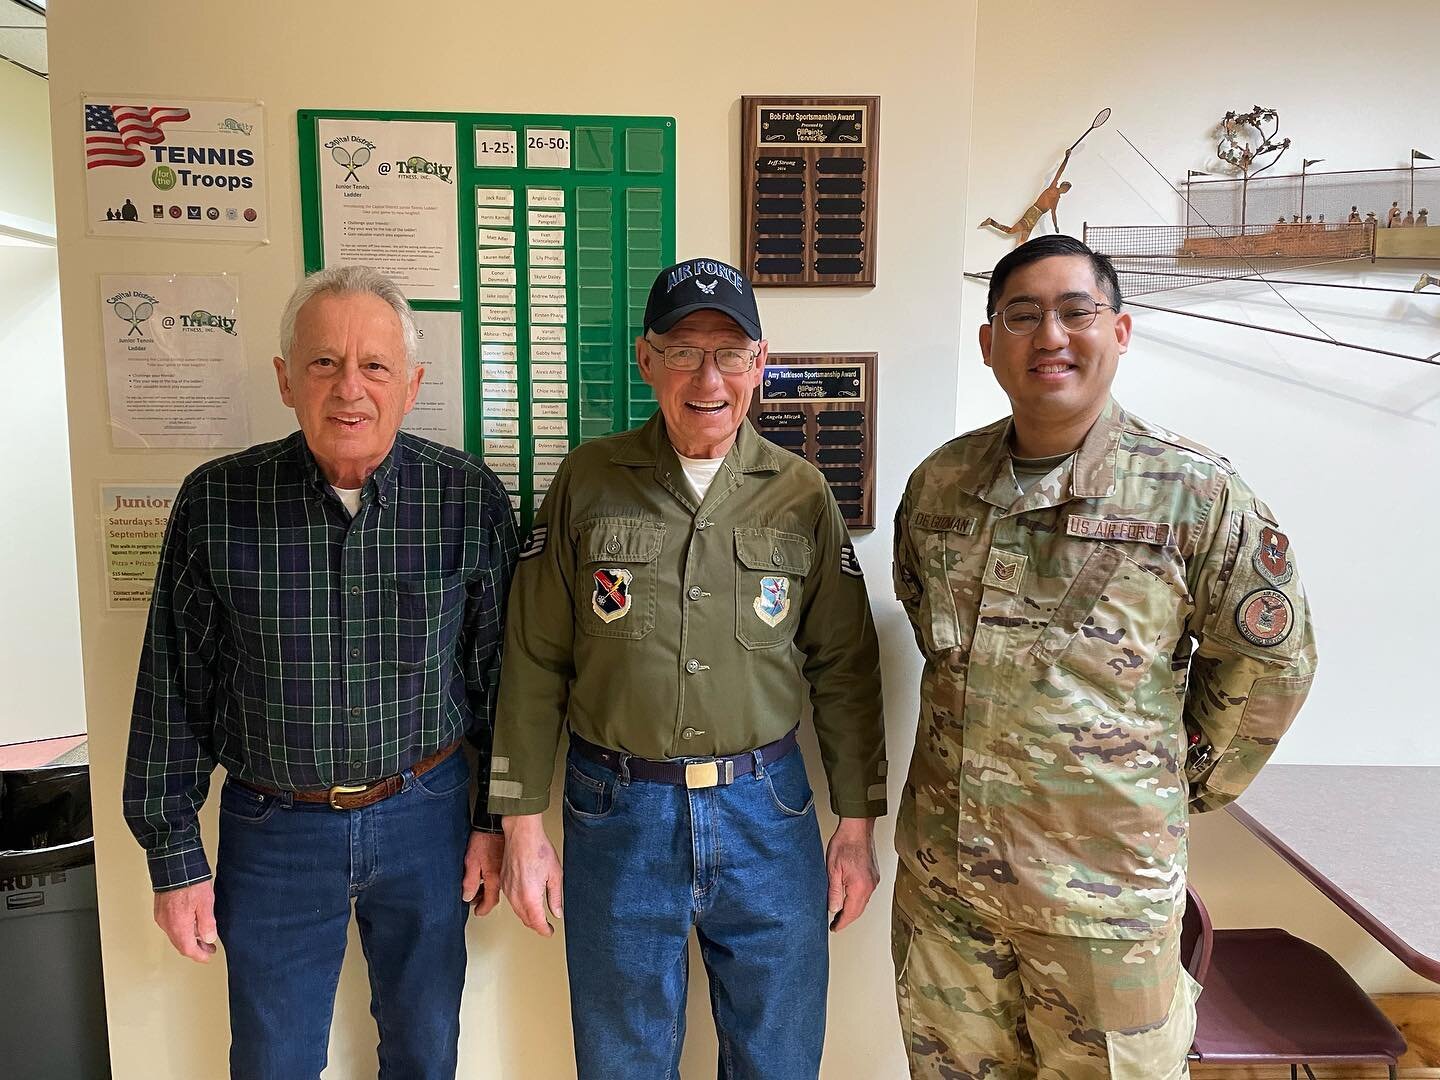 Tennis for the Troops members, Tom Dygert, William Ciejka and Bj Guzman are all stationed at Misawa Air Force Base Japan at various times between 1959 -2016. Thank you for your service￼! From the staff at Tri-City Fitness.